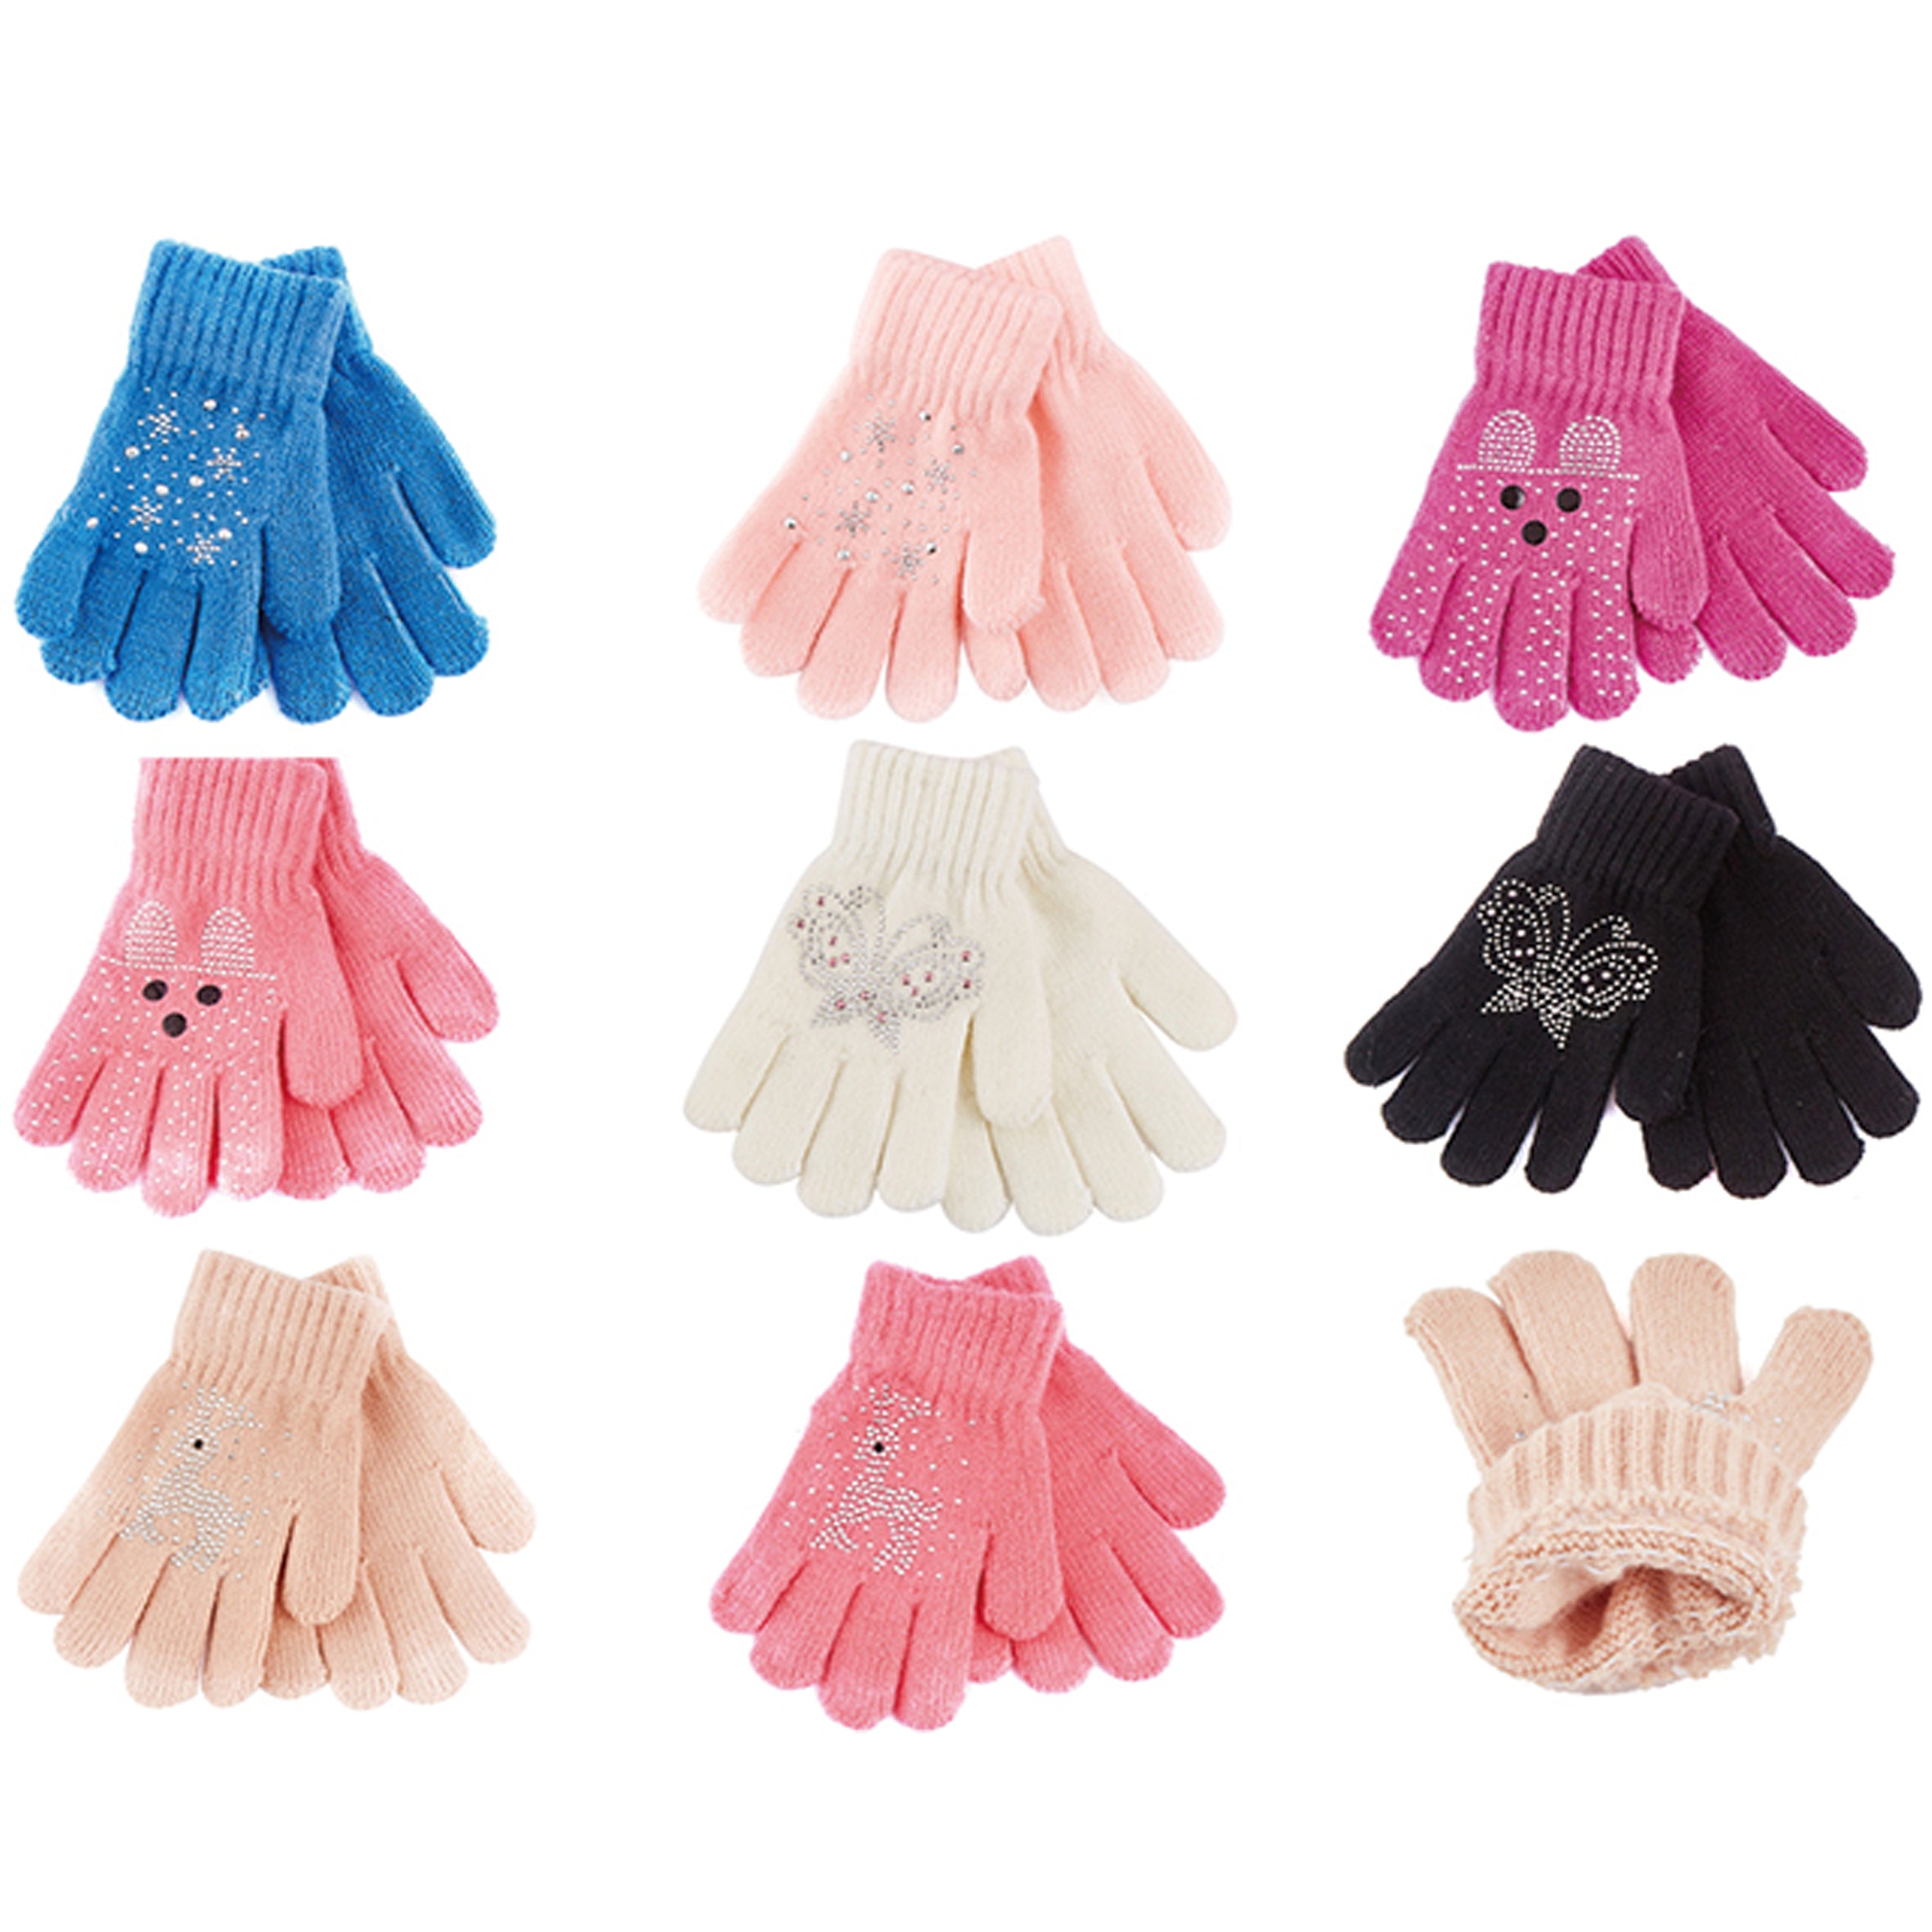 Wholesale CLOTHING Accessories Kids Glove Sto Point Brick Knitted Gloves NH258